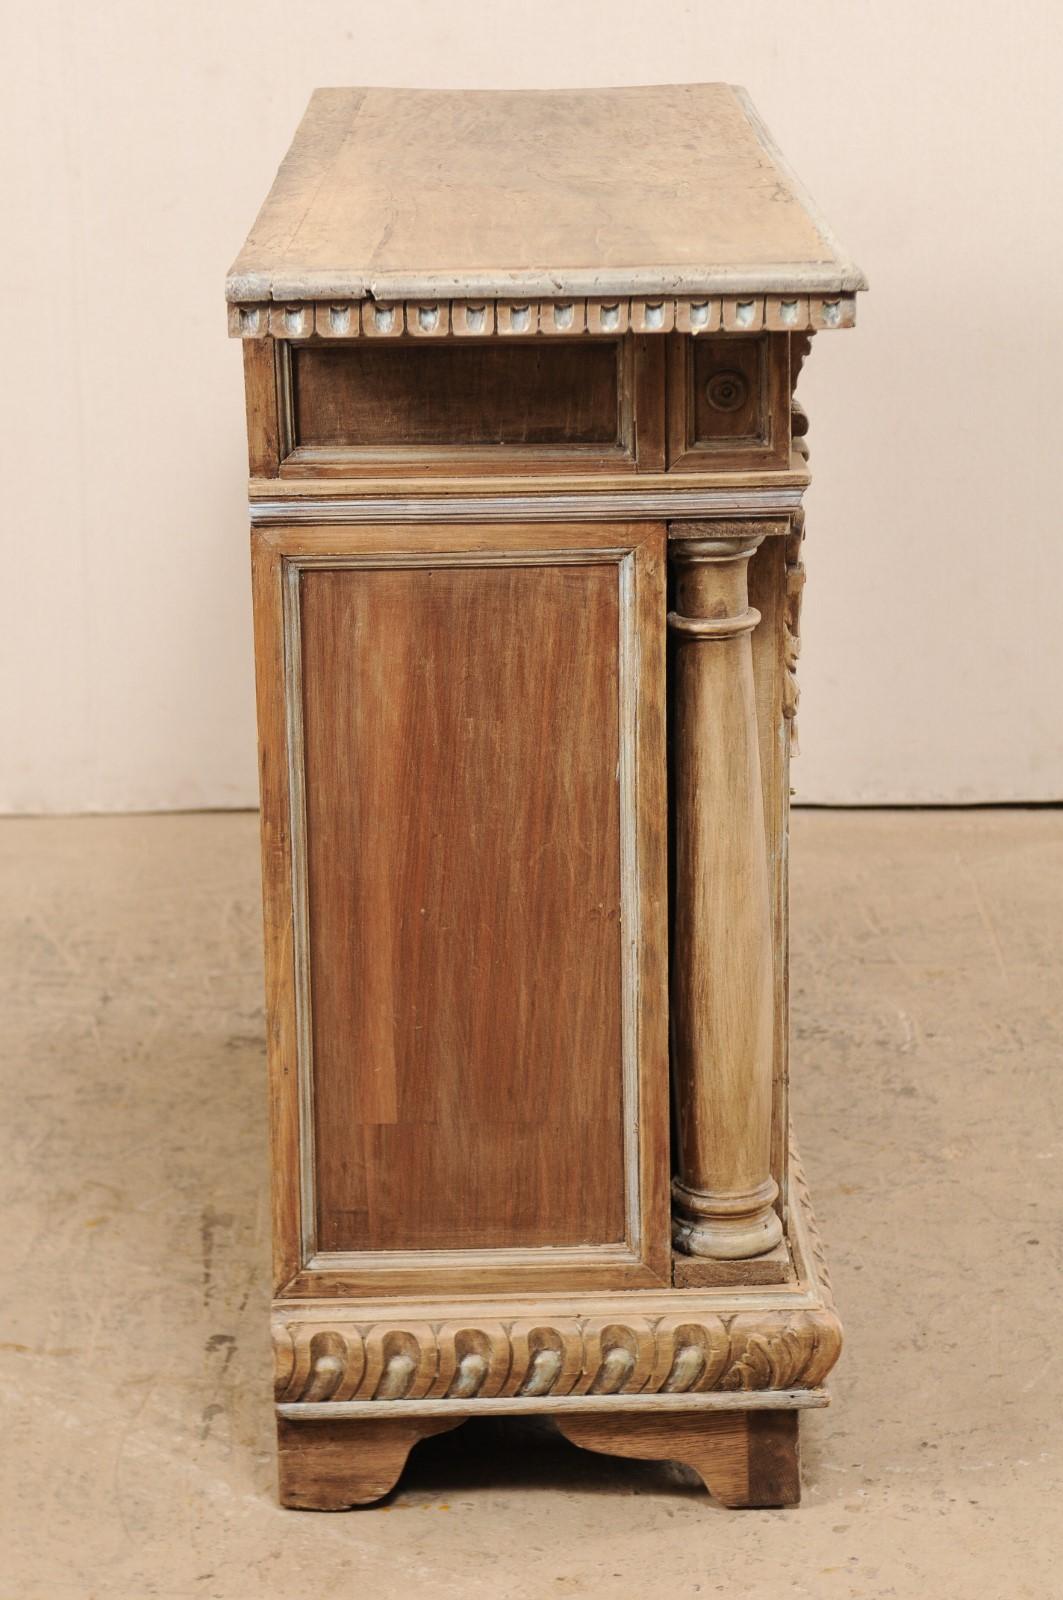 Italian Elaborately-Carved Wood Buffet Console Cabinet, Late 19th Century For Sale 4